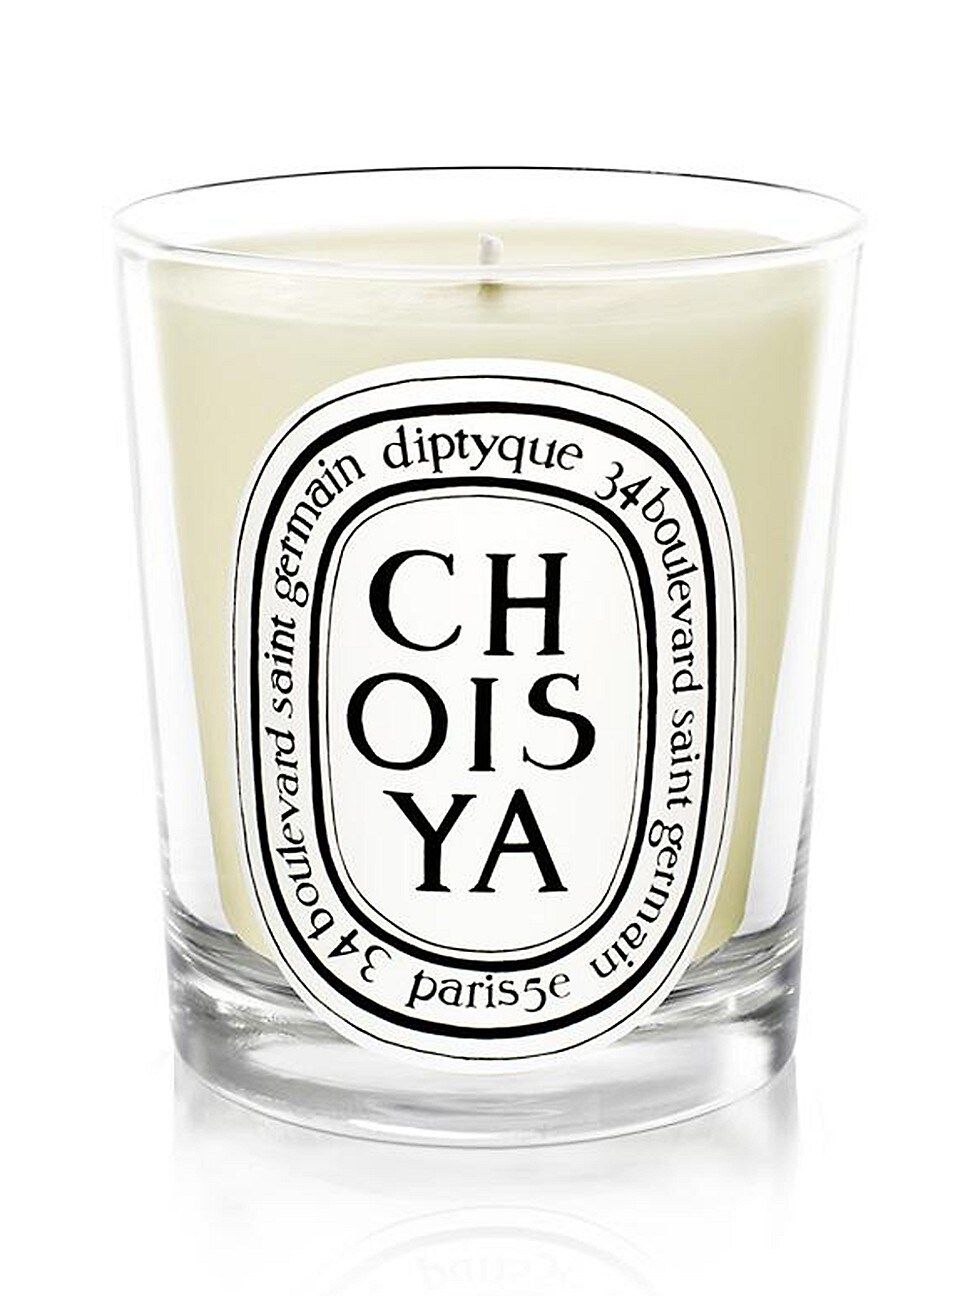 Diptyque Choisya Scented Candle | Saks Fifth Avenue